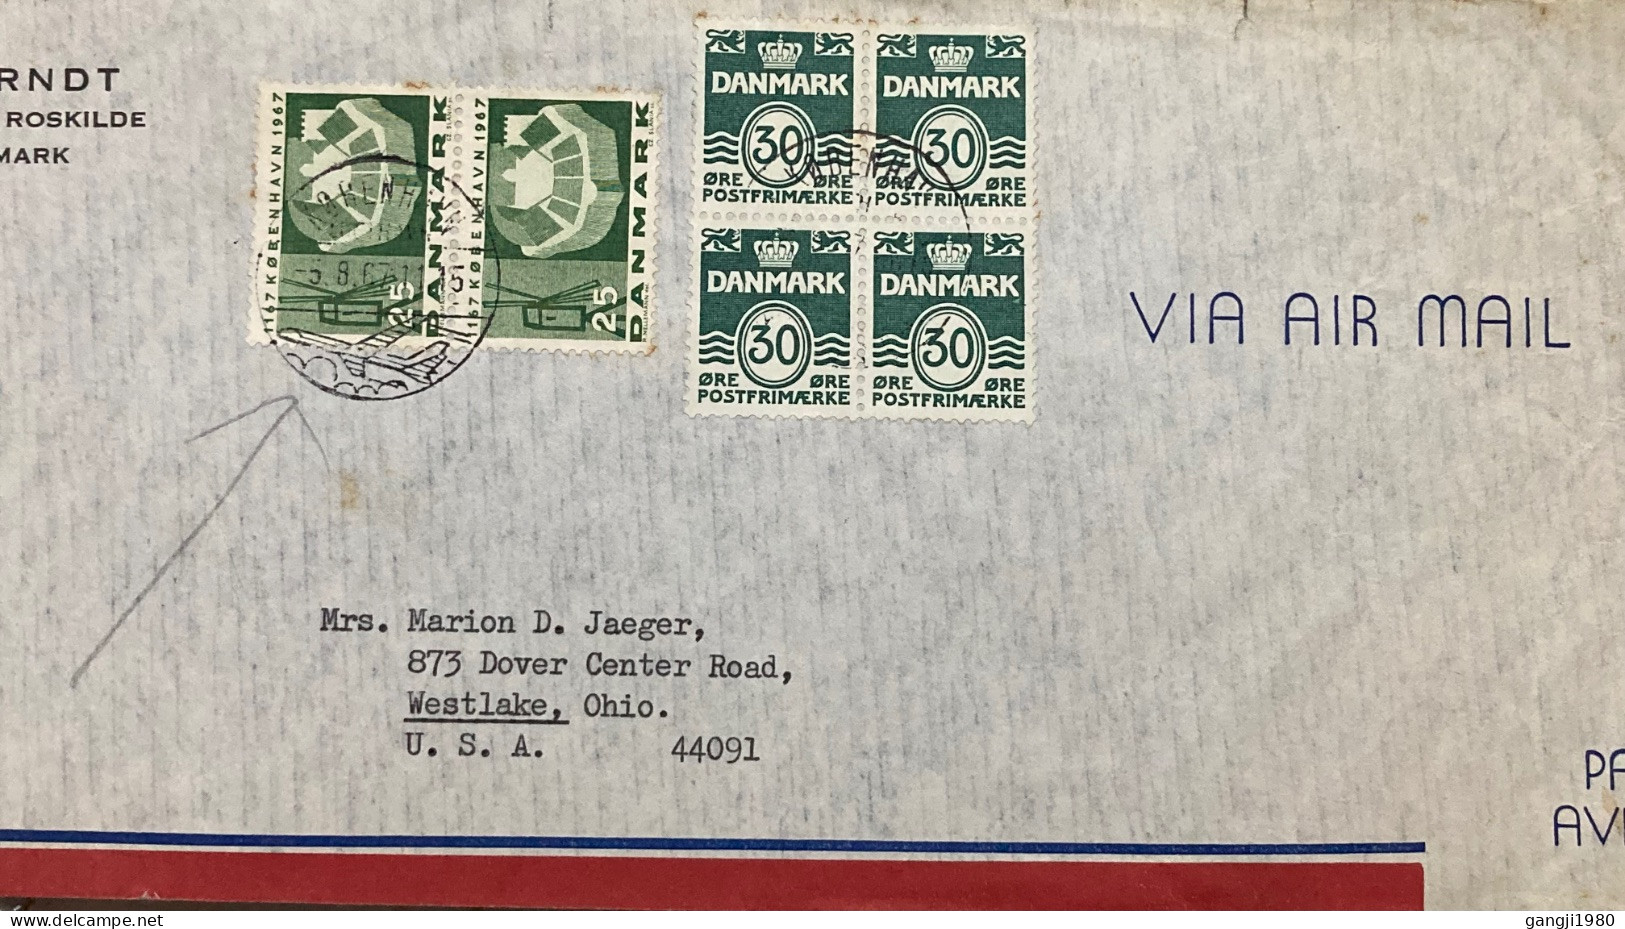 DENMARK-1967, COVER USED TO USA, COPENHAGEN OLD CITY & WINDMILL, COAT OF ARM, CITY SPECIAL, PICTURAL CANCEL,FIRM F·ARNDT - Lettres & Documents